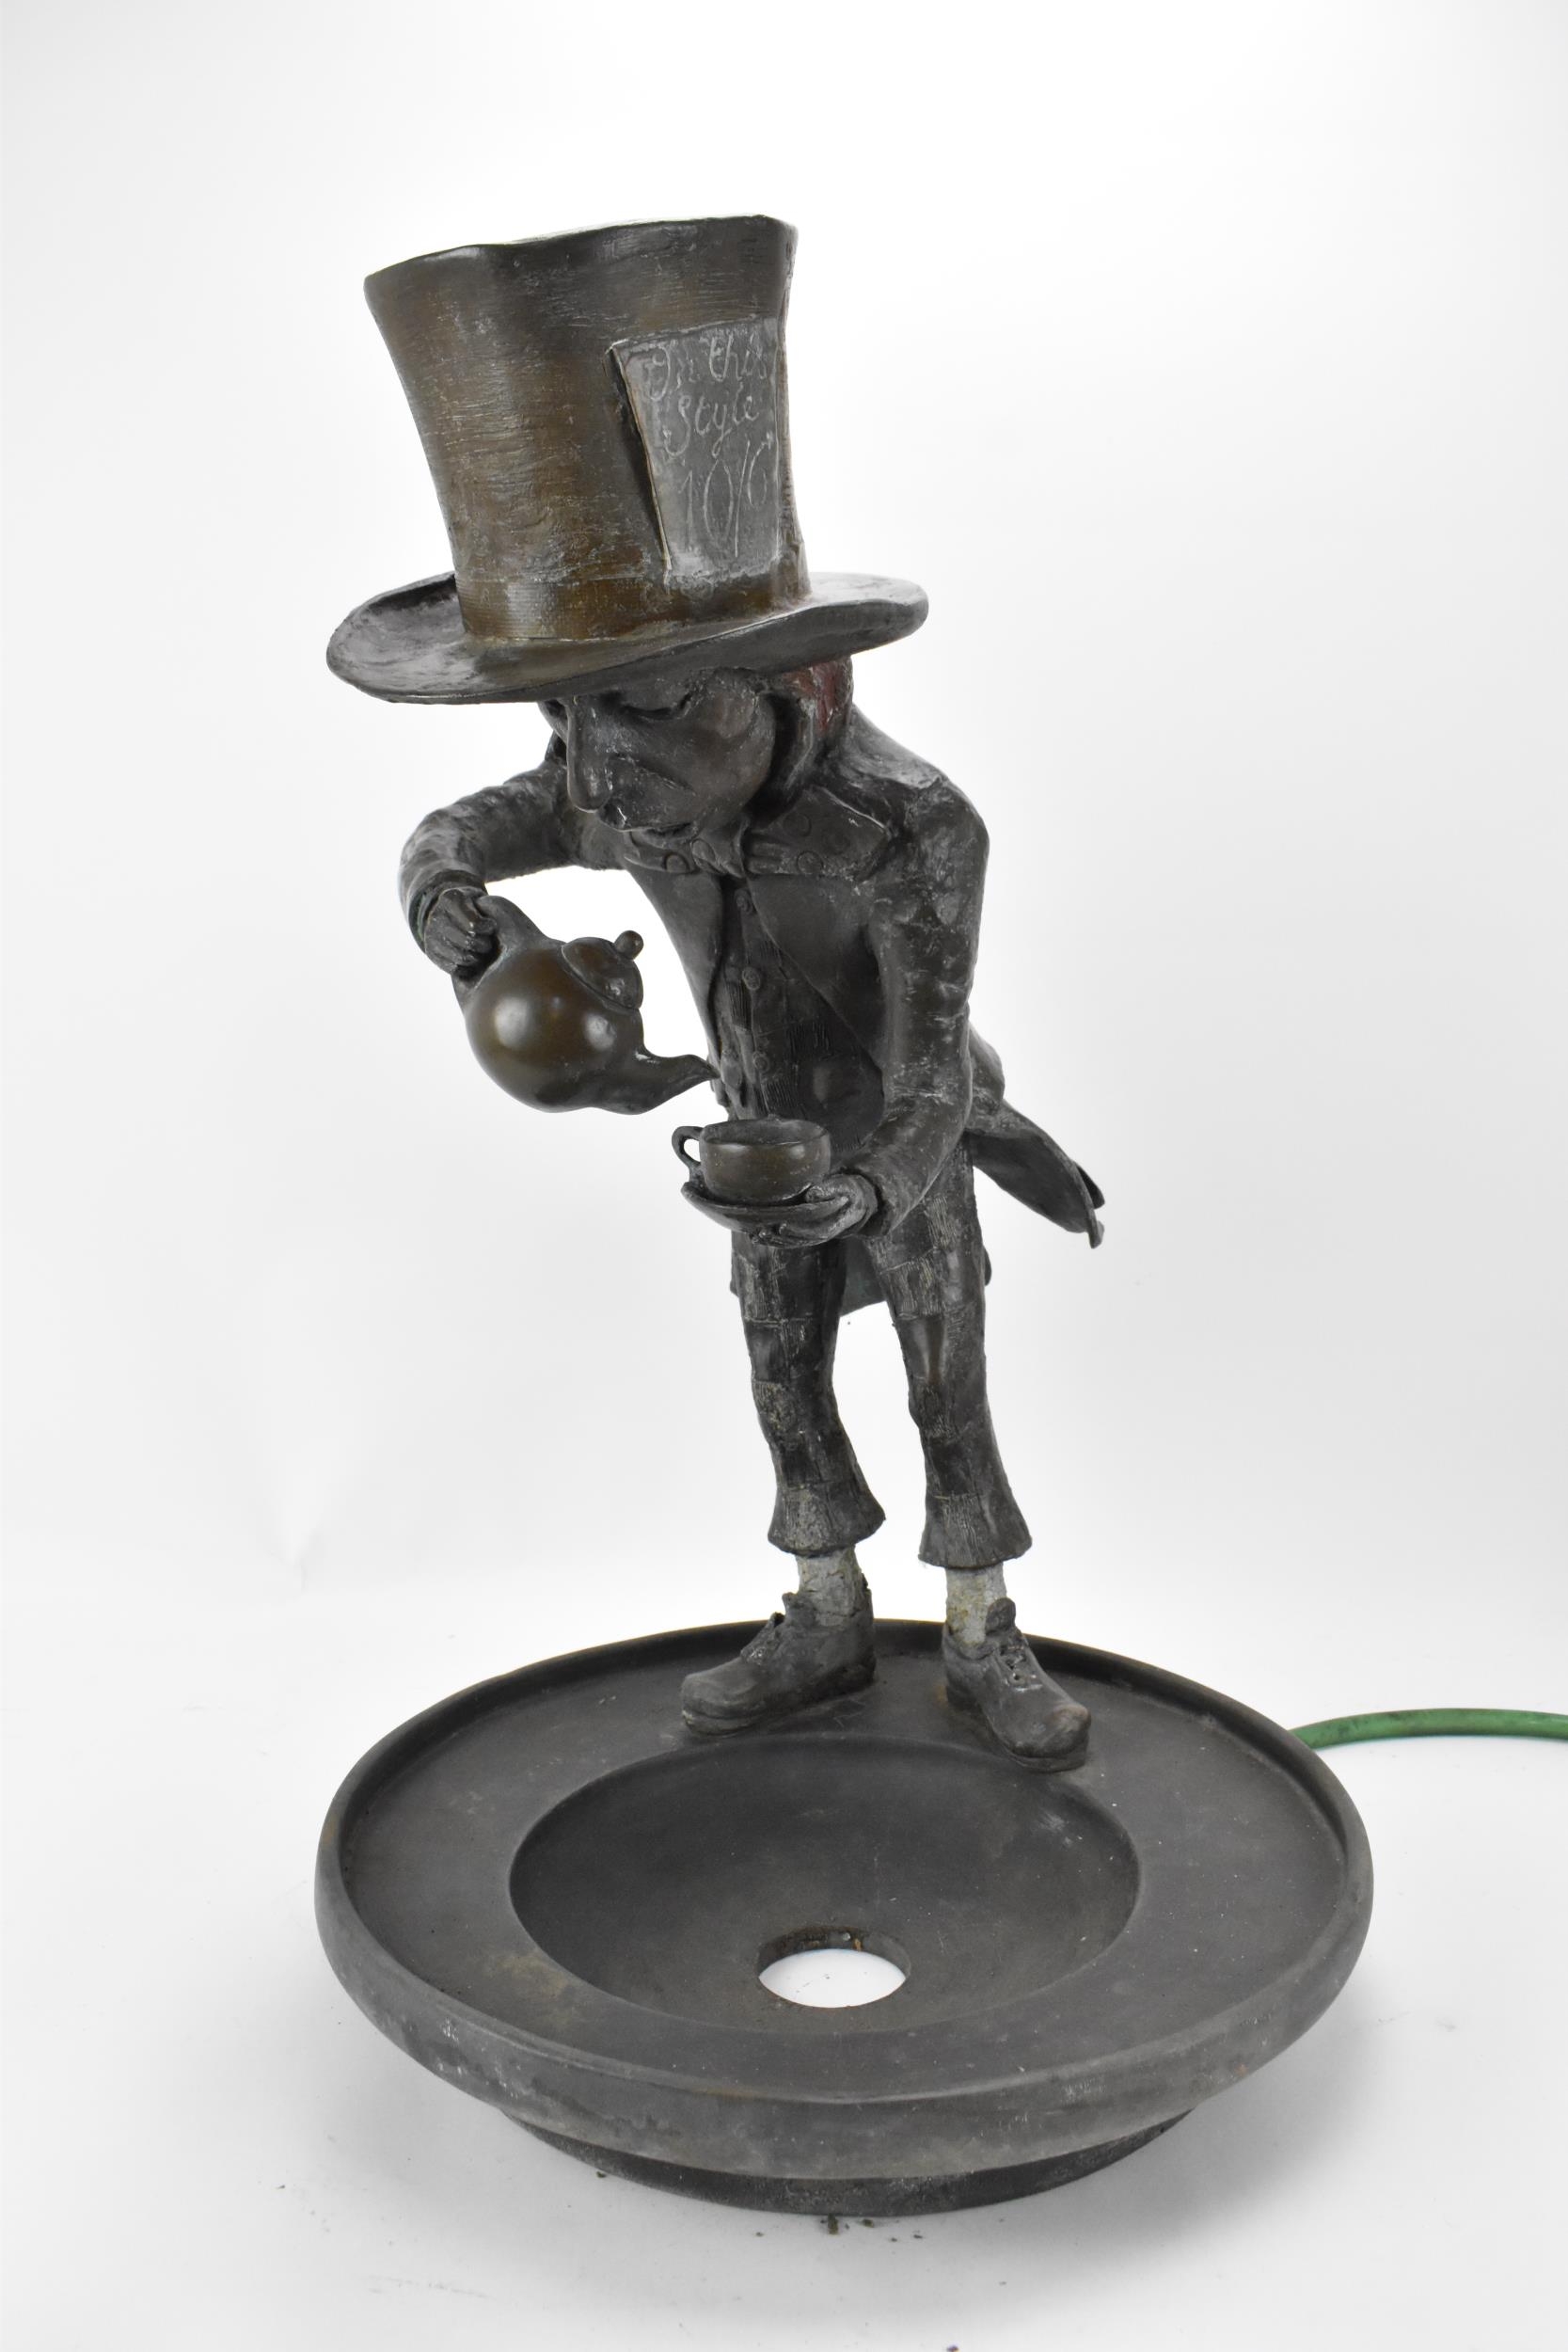 A cold cast bronze sculptural water feature of Alice in Wonderland's Mad Hatter, by Robert James